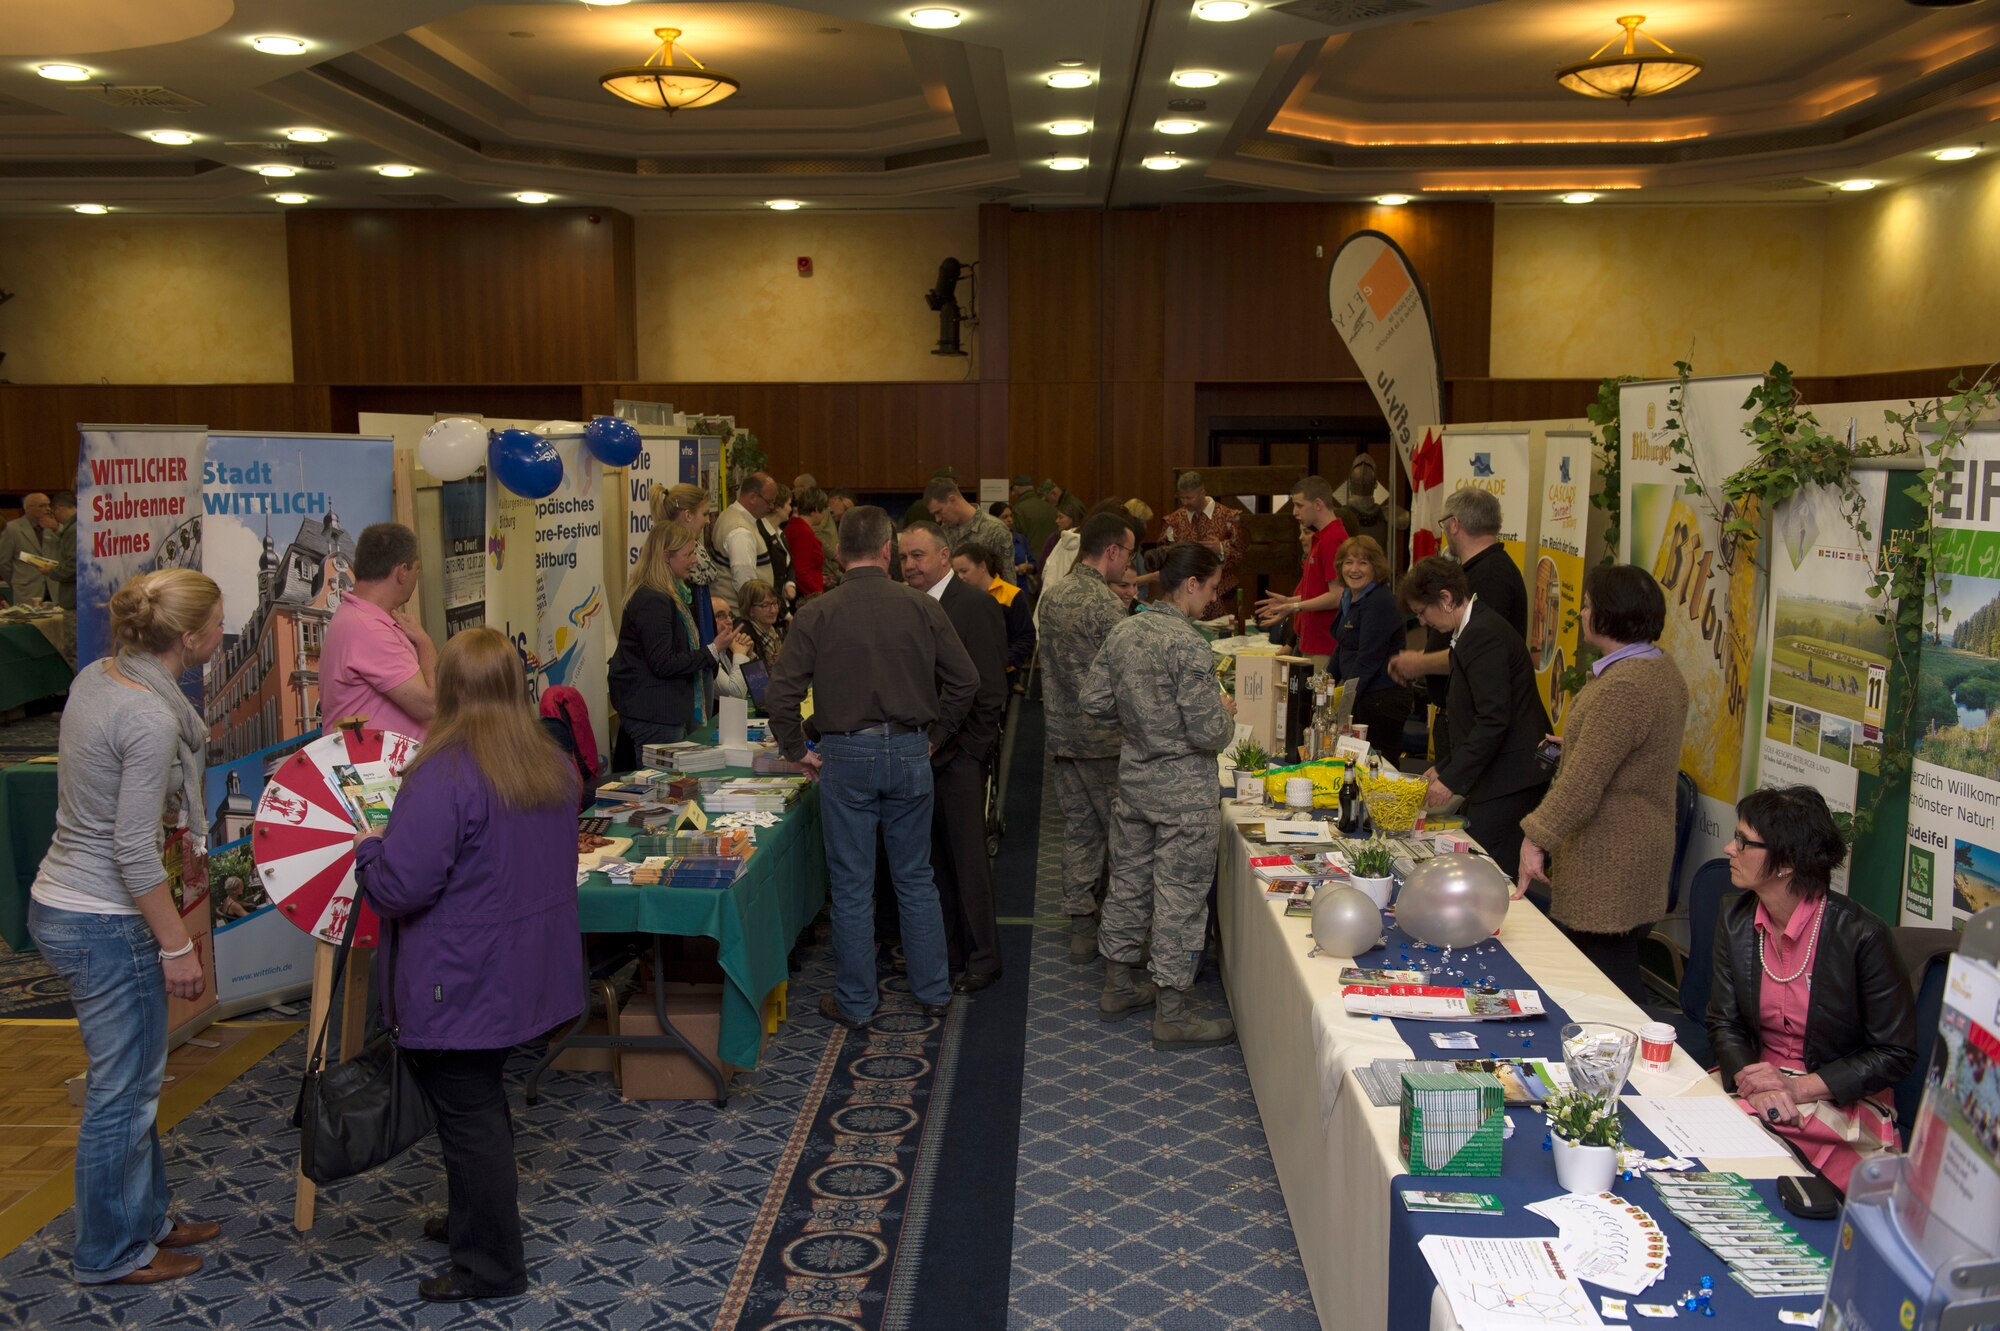 SPANGDAHLEM AIR BASE, Germany -- Spangdahlem Airmen and community members attend the ninth annual Explore the Eifel information fair April 19, 2013. More than 60 vendors attended the event to show community members what activities and products the Eifel region has to offer. (U.S. Air Force photo by Senior Airman Natasha Stannard/Released)